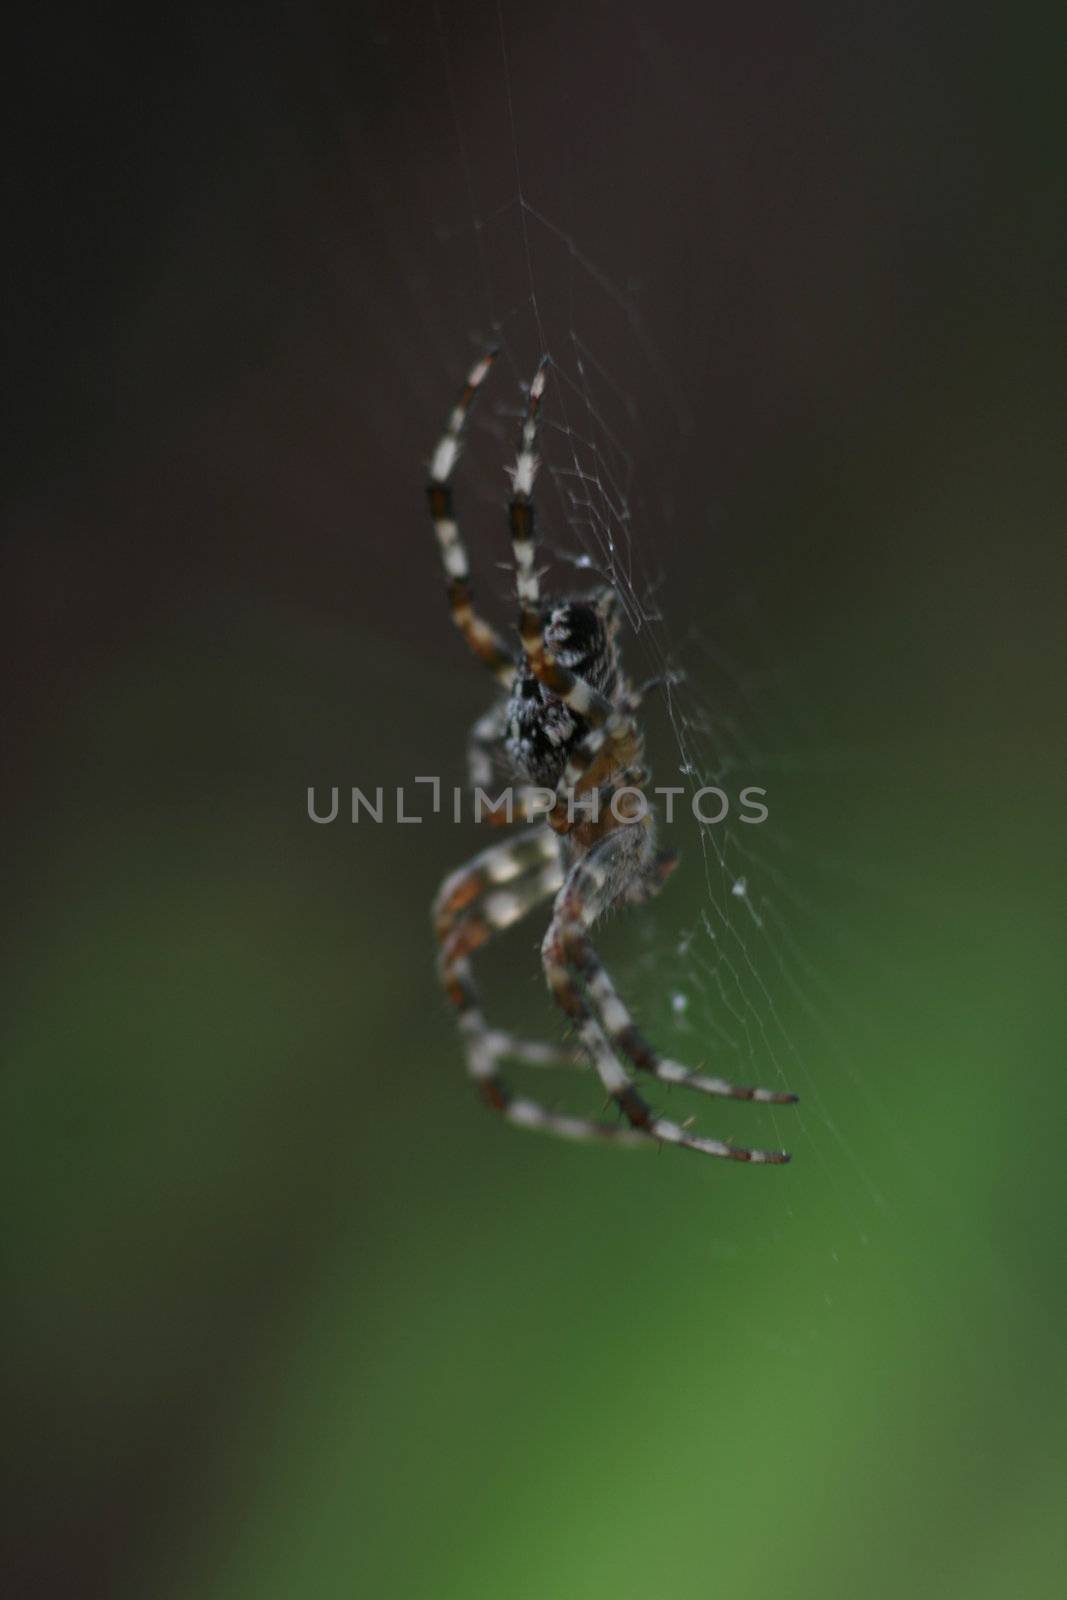 cross spider sits in its net